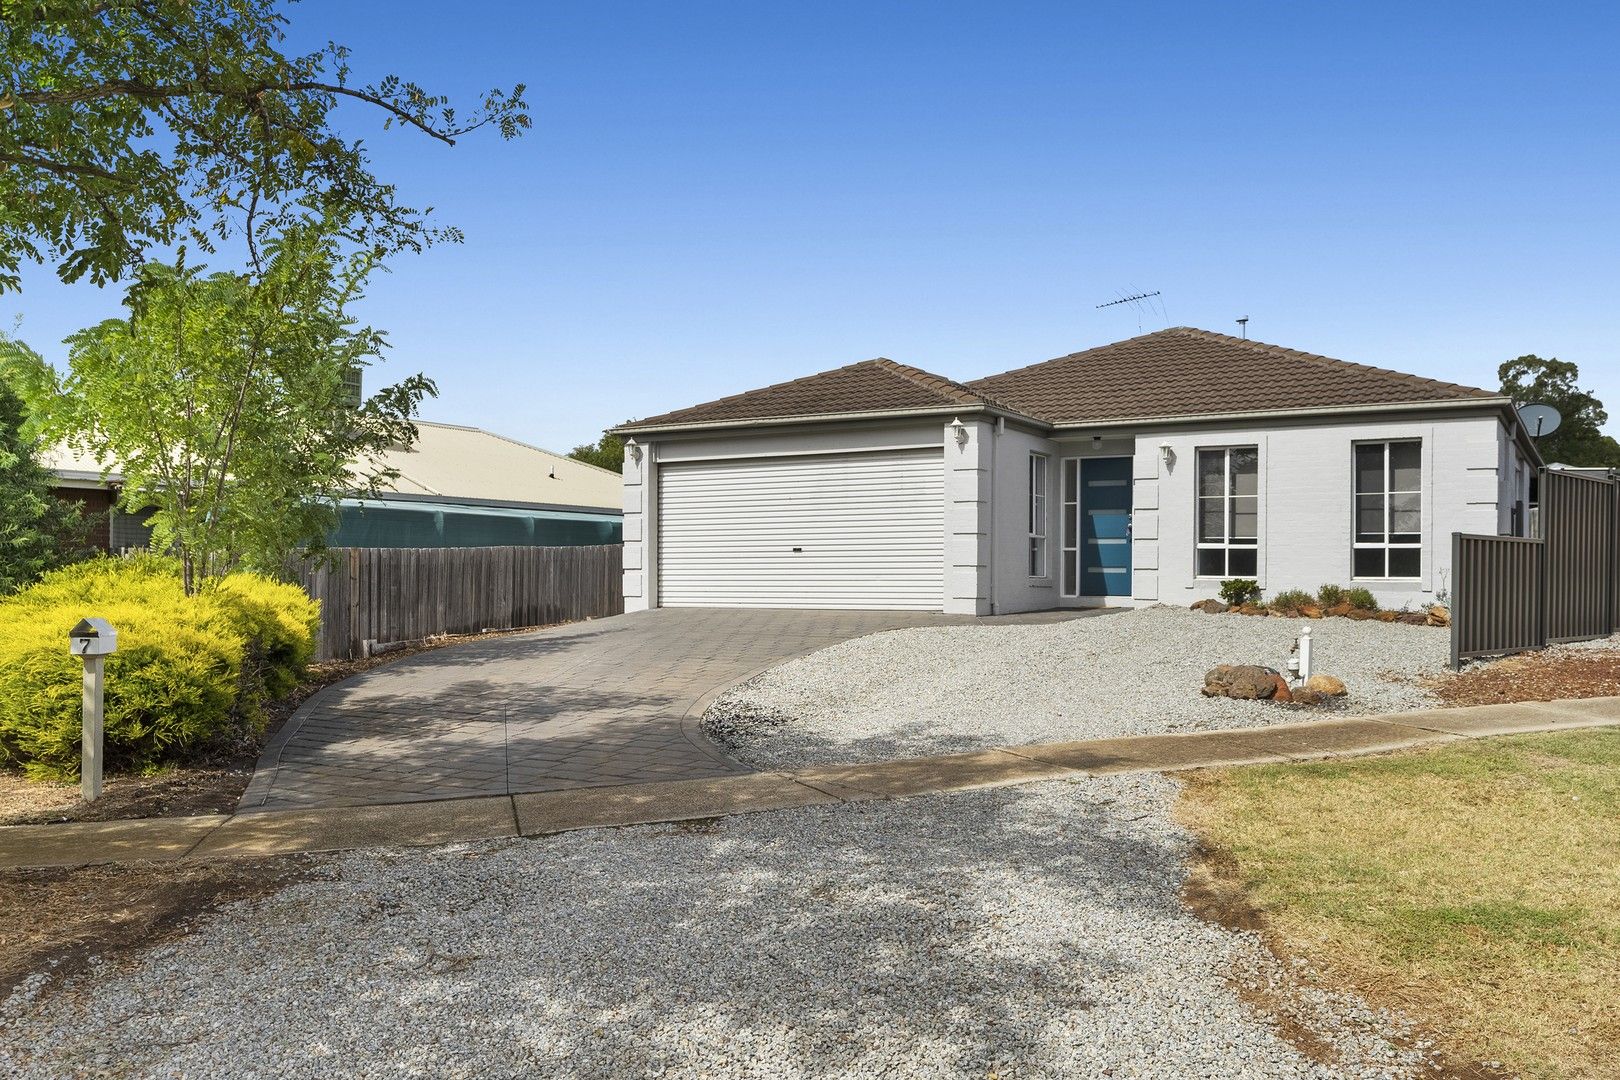 4 bedrooms House in 7 Steele Court BACCHUS MARSH VIC, 3340